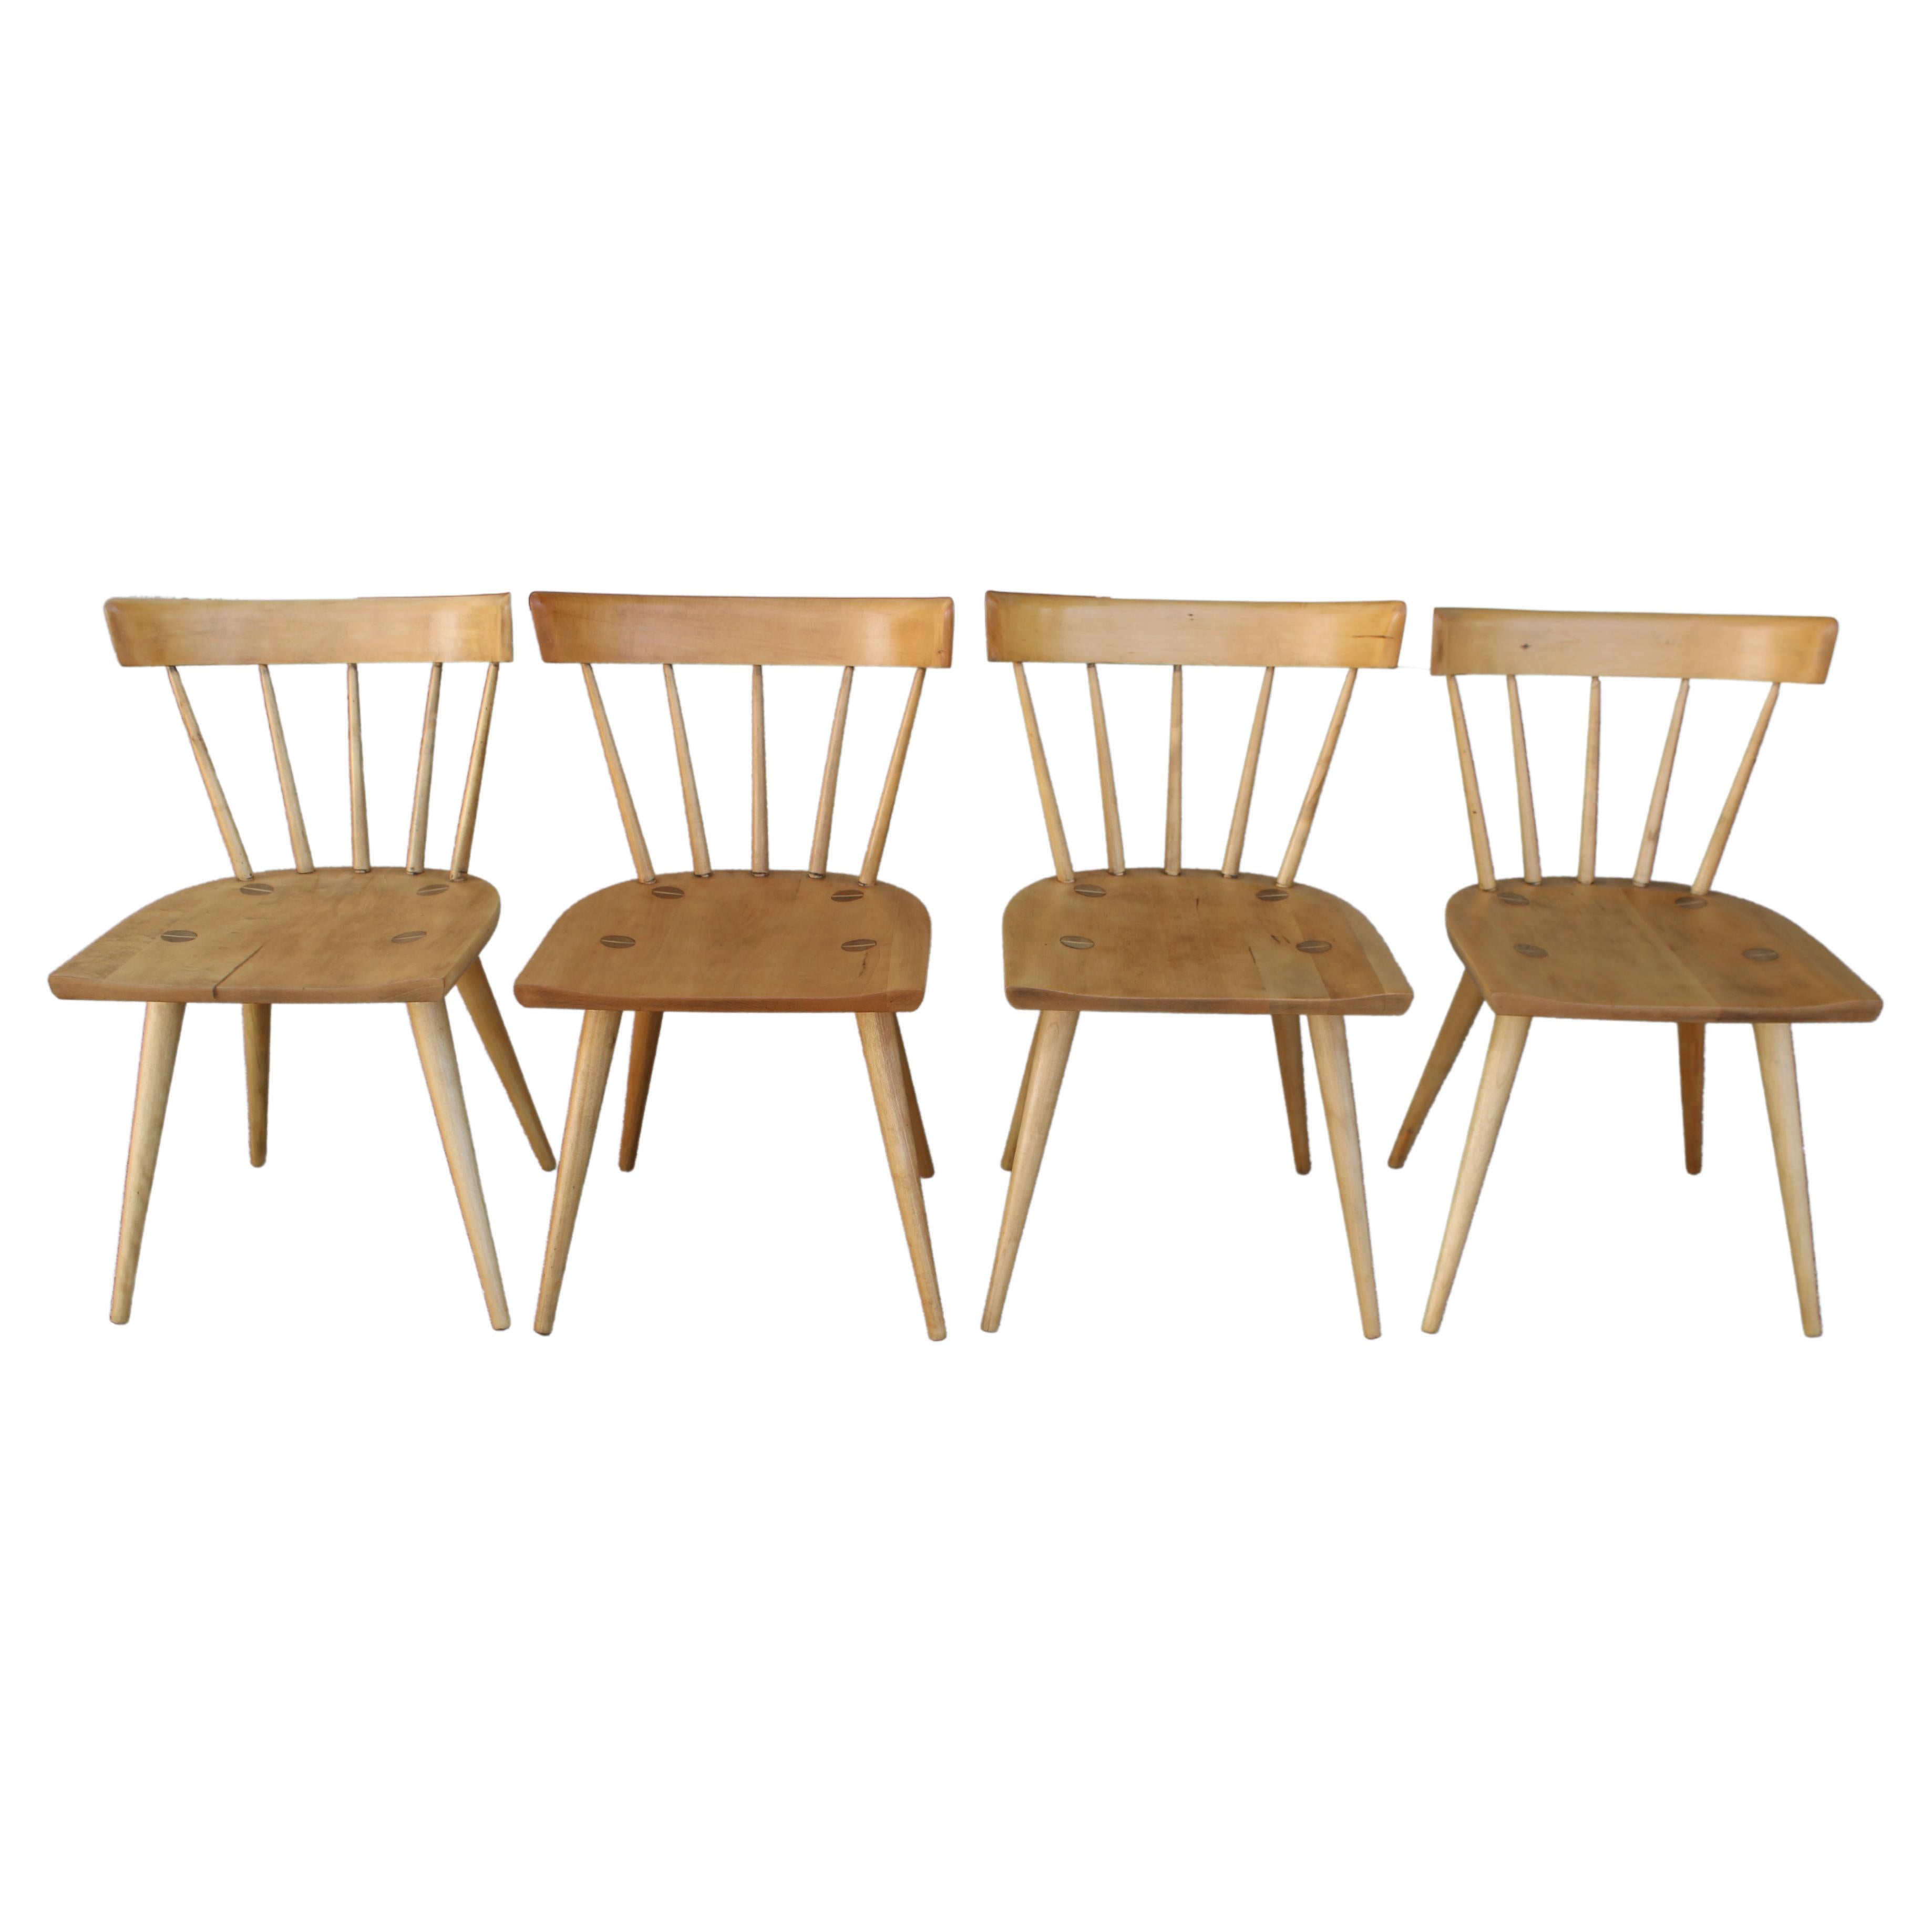 Set of 4 Dining Chairs by Paul McCobb for the Winchendon Furniture Co.